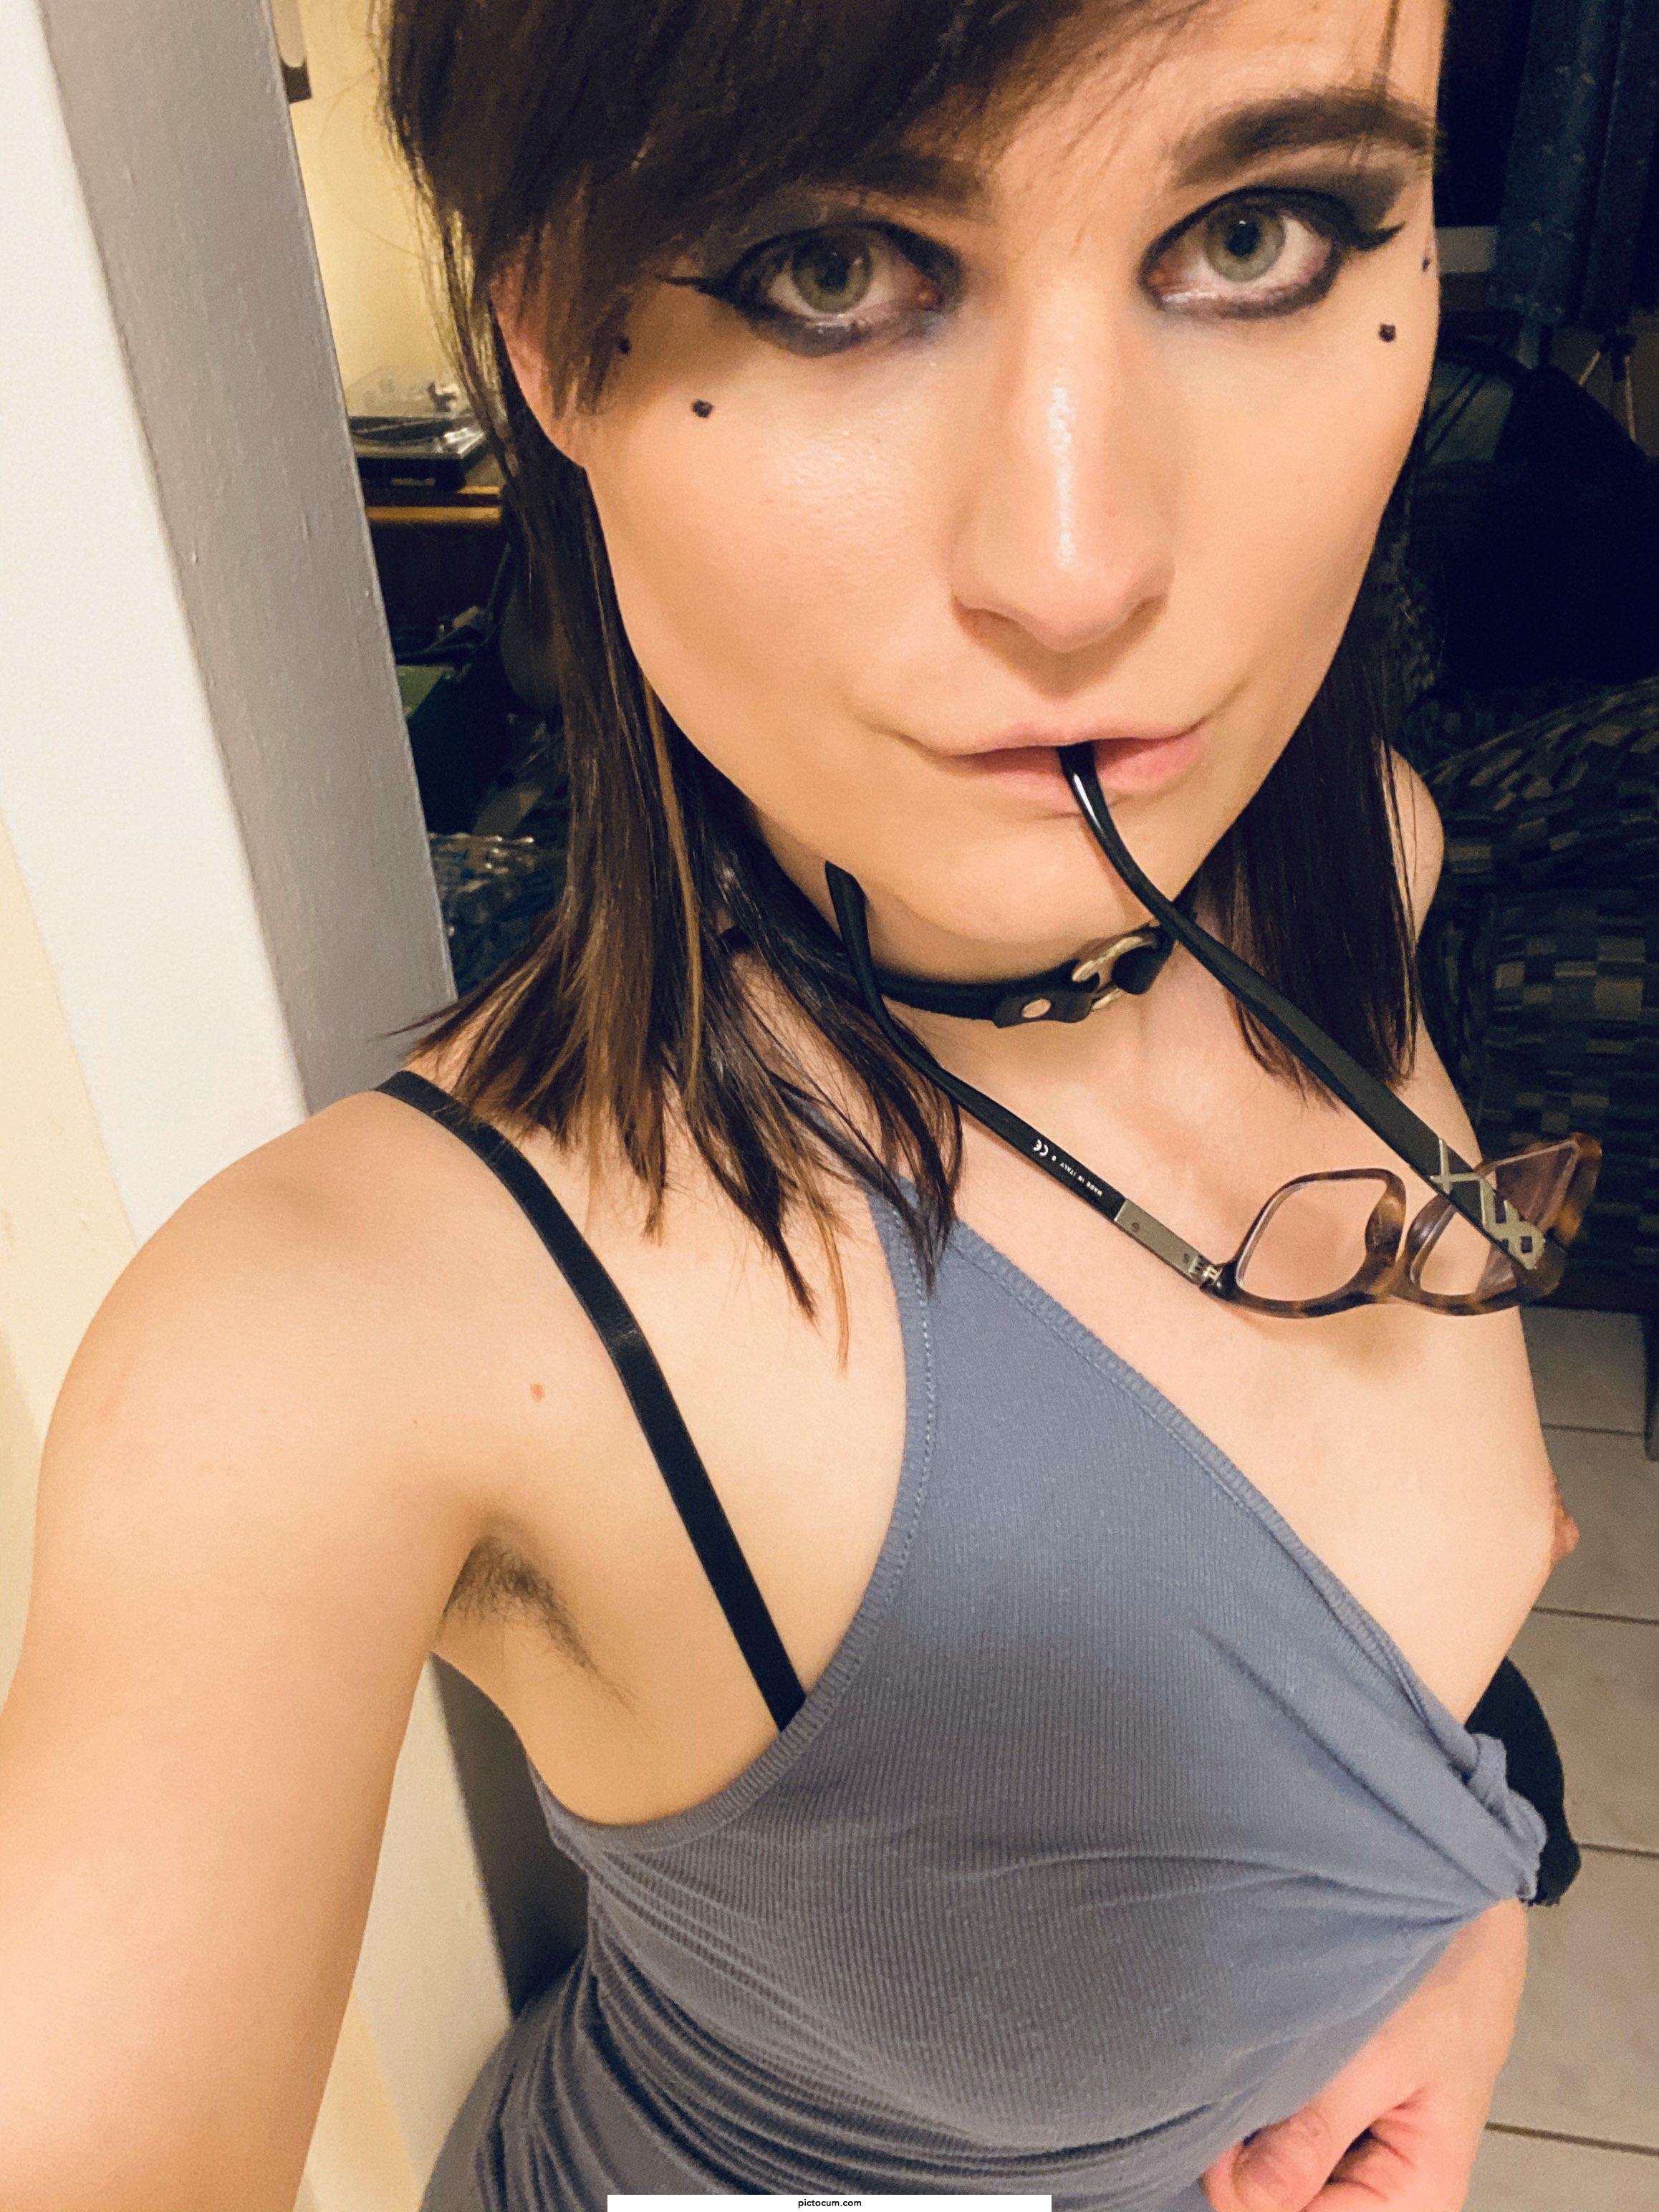 Daddy.. will you facefuck me now? I did my make up the way you like it and I... well I tried to put on your favorite dress...